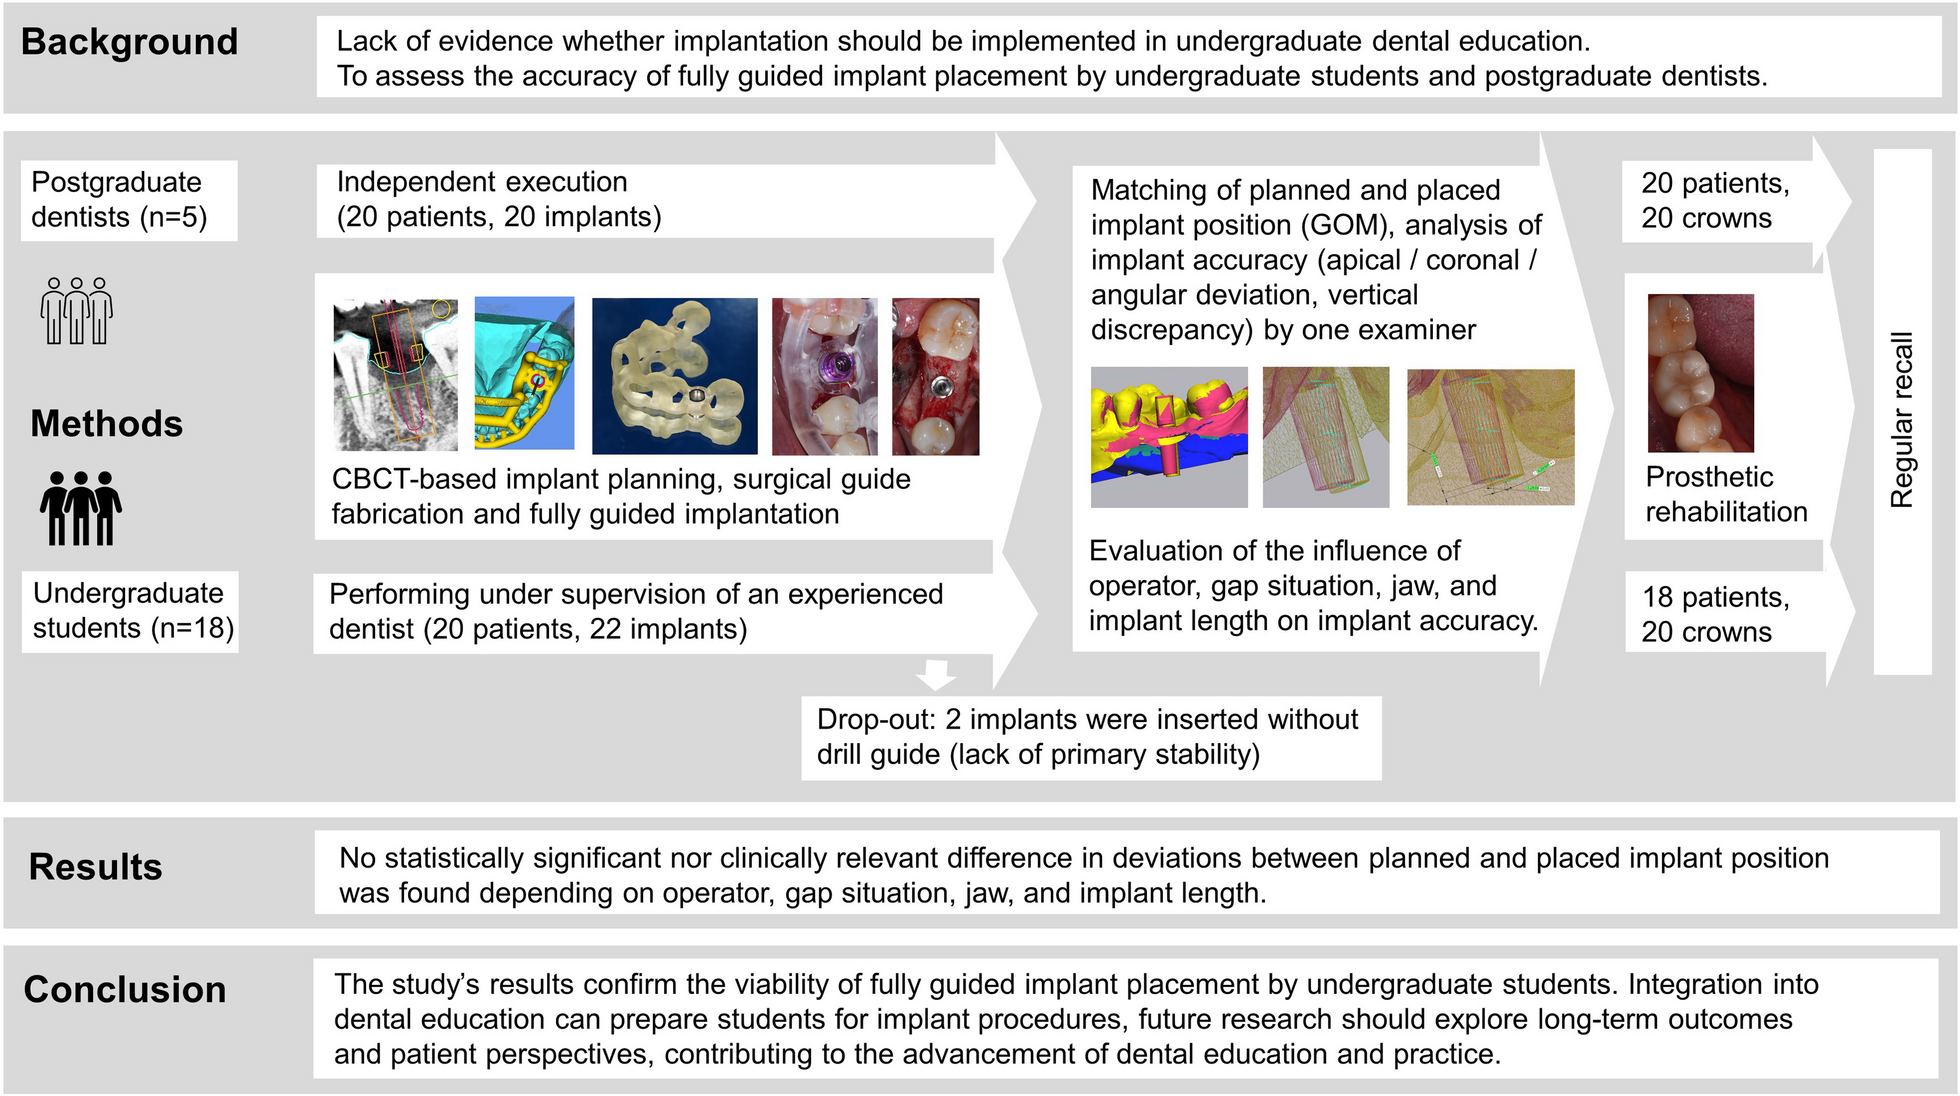 Evaluation of the accuracy of fully guided implant placement by undergraduate students and postgraduate dentists: a comparative prospective clinical study